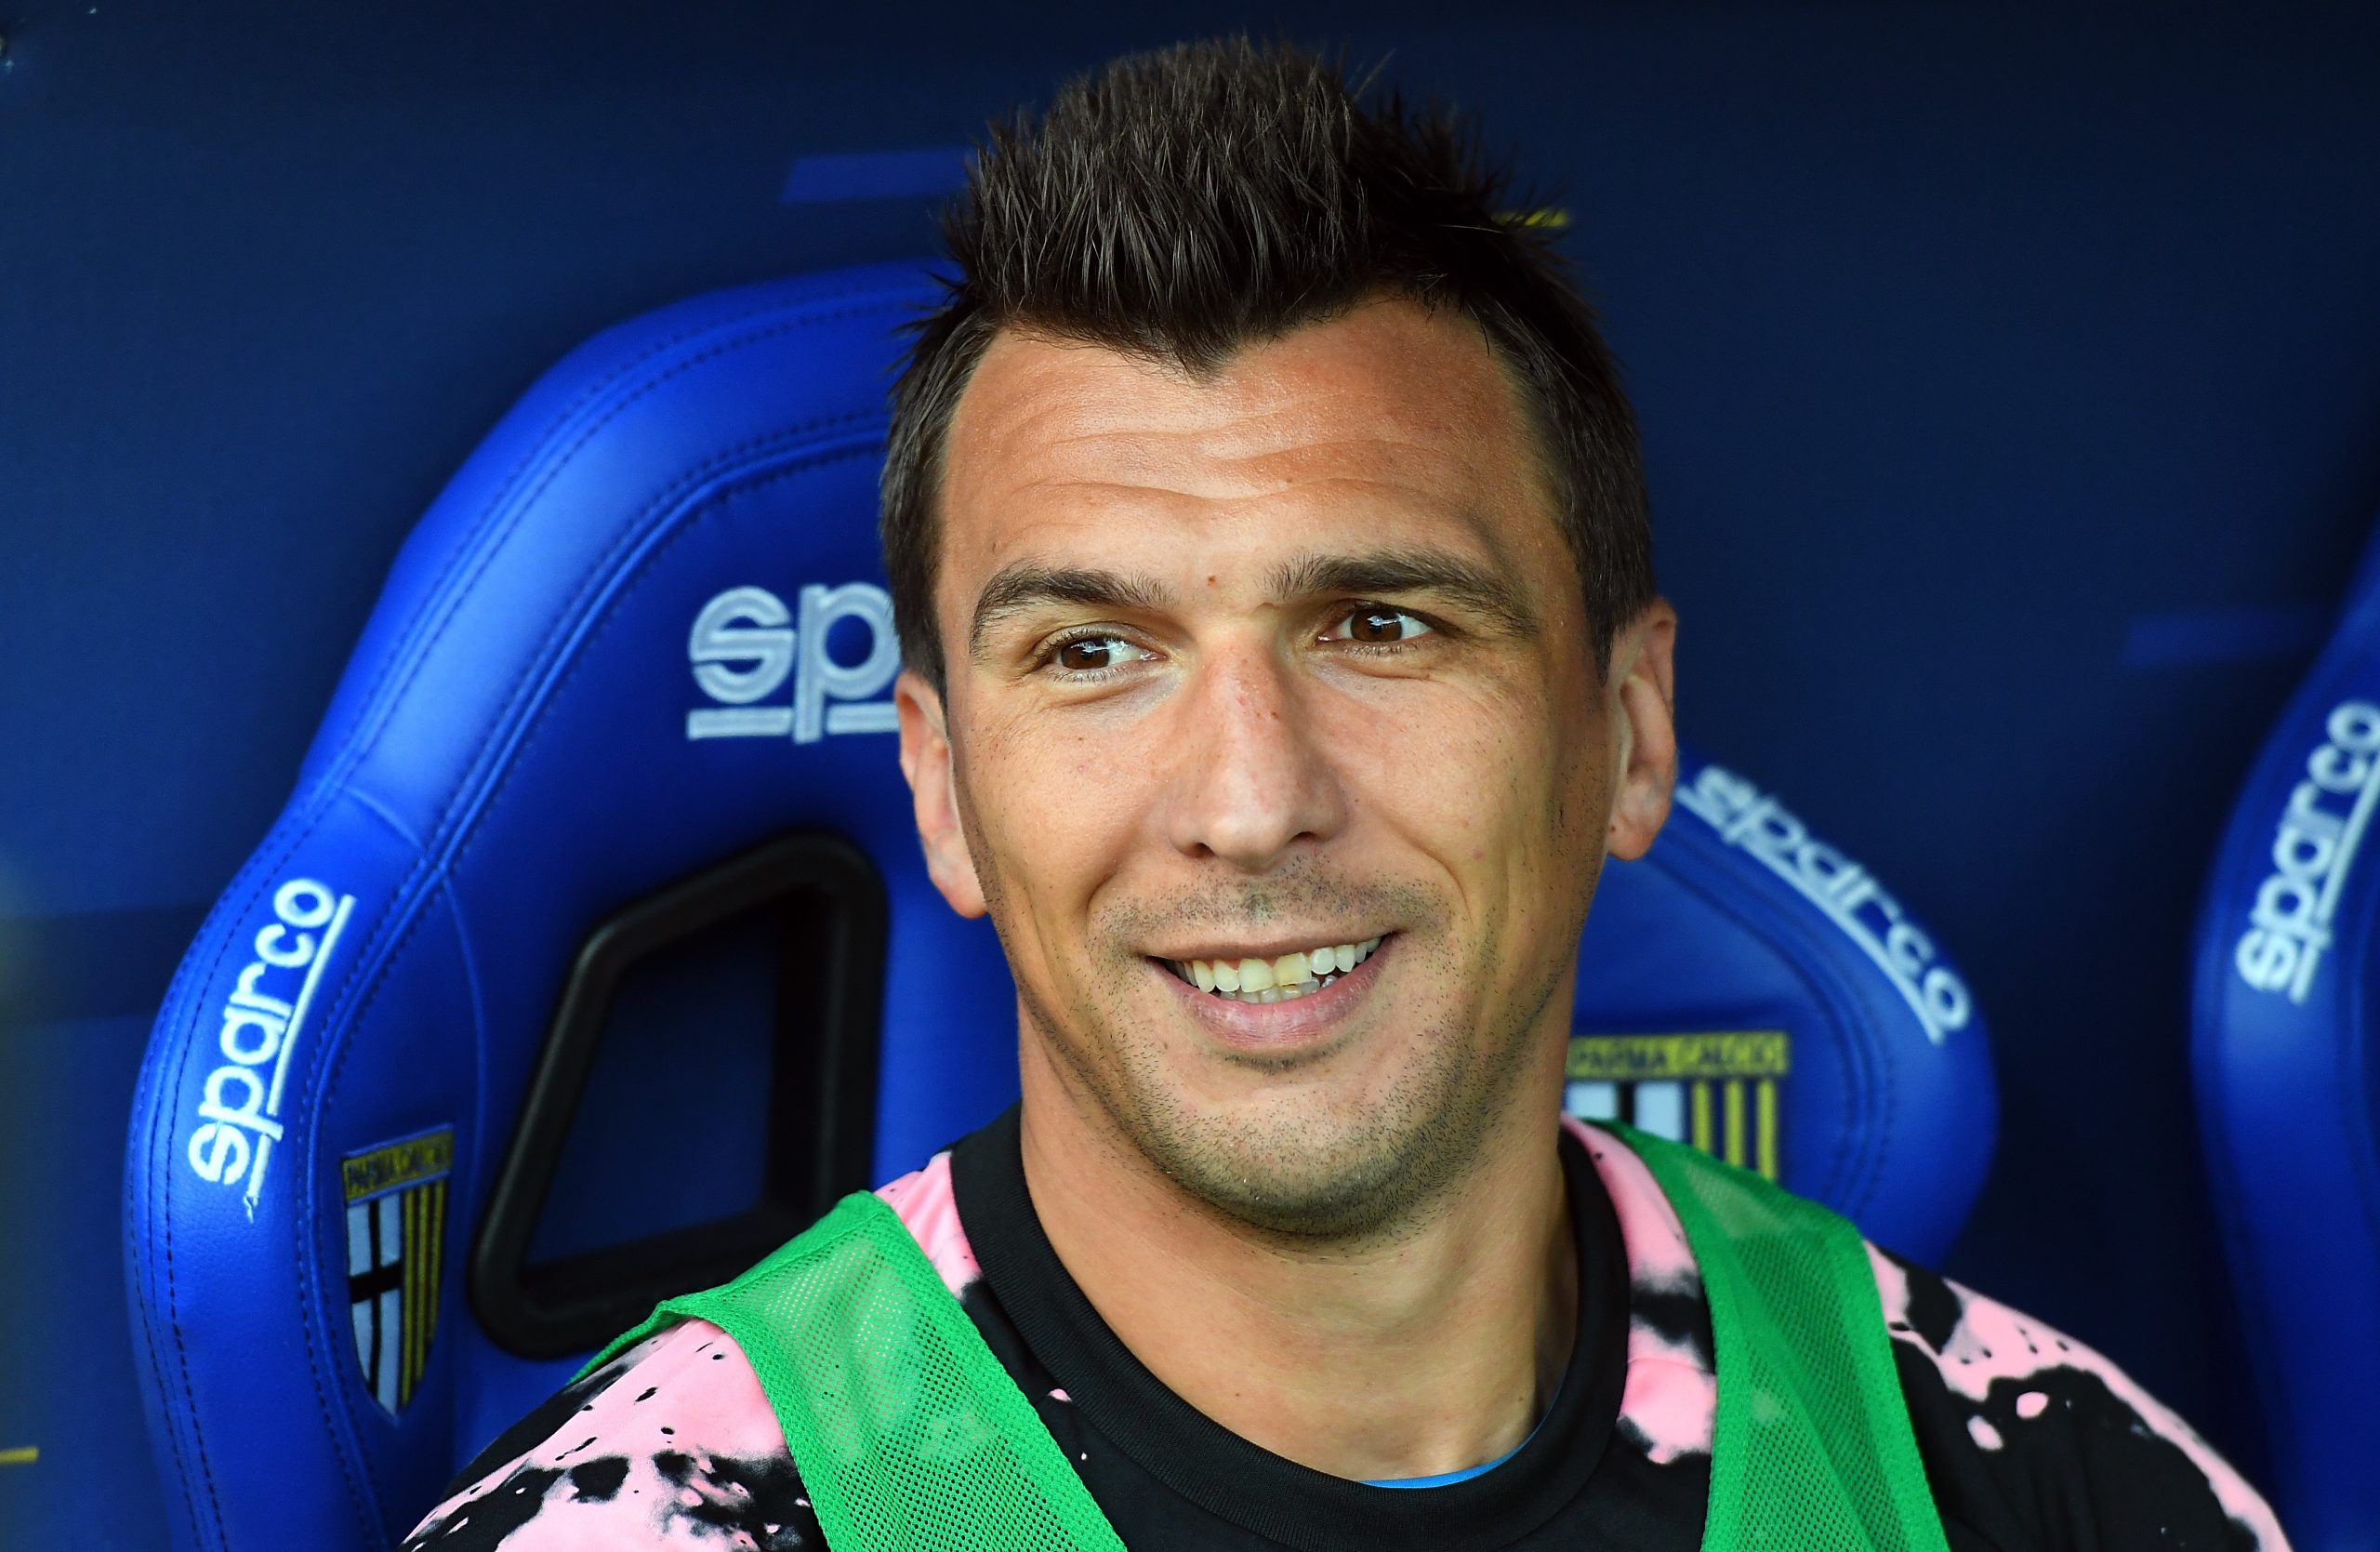 Hargreaves urges Man United to make a move for Mandzukic who is seen in the photo